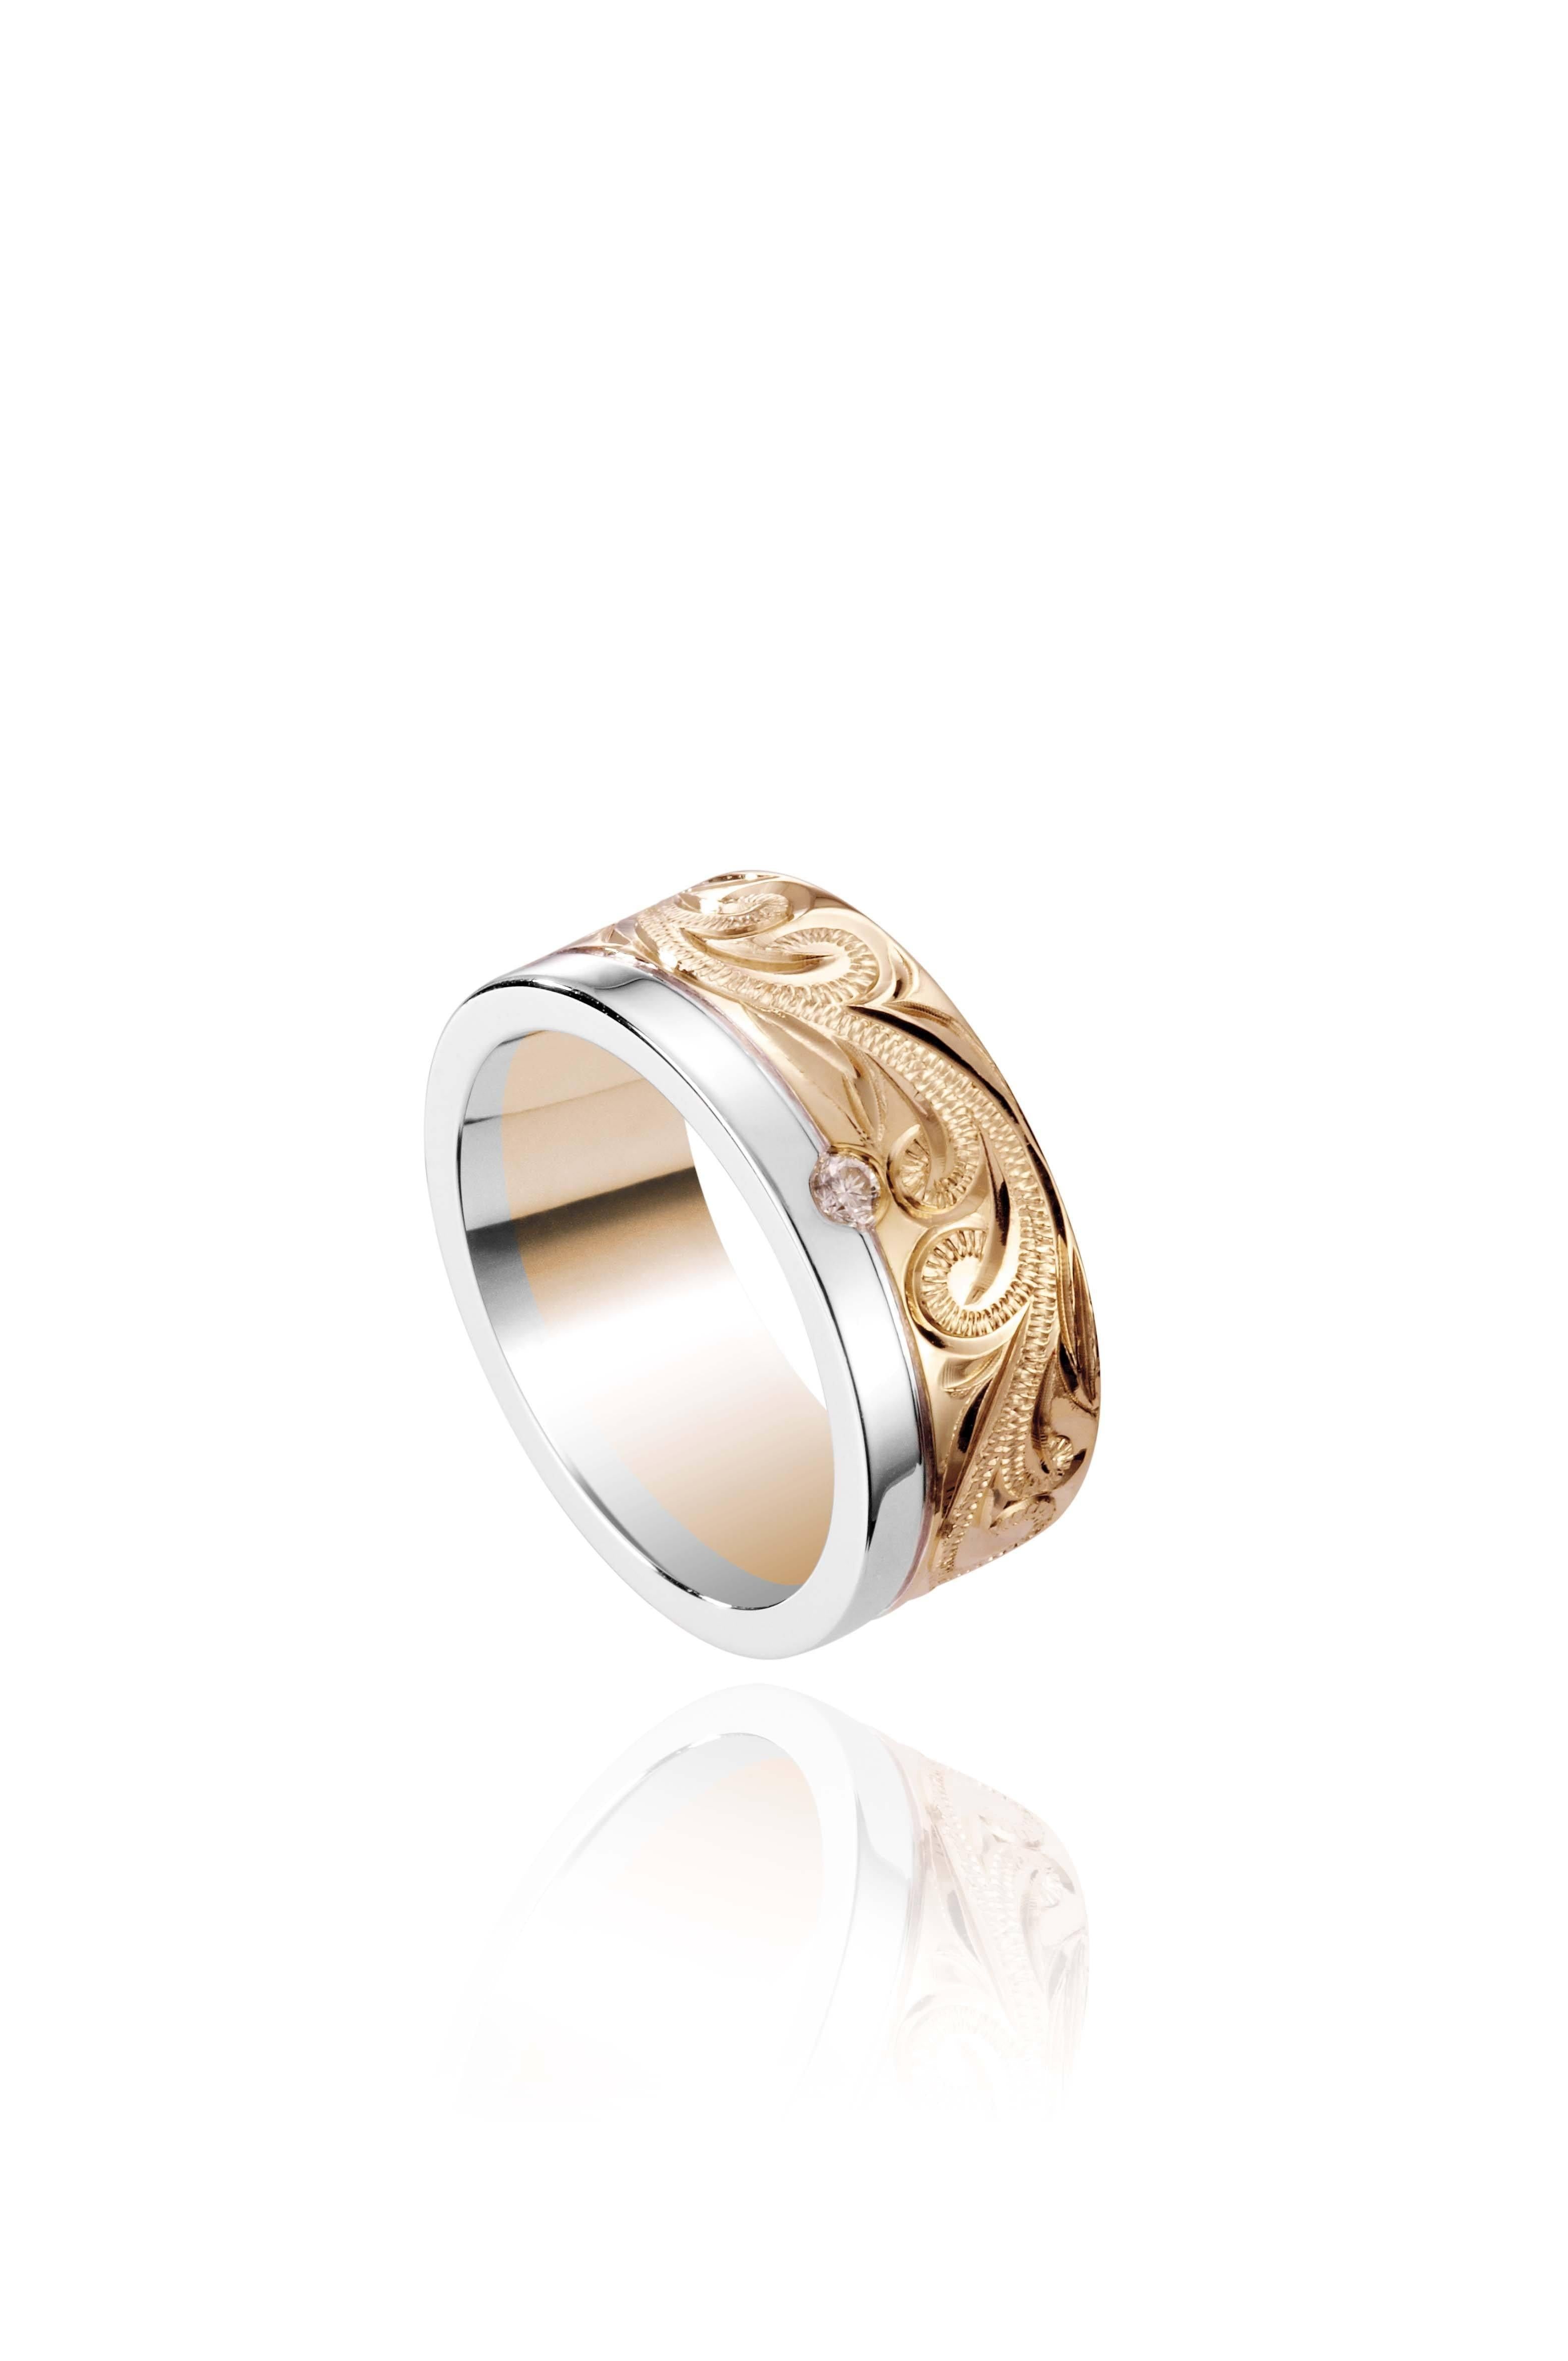 The picture shows a 14K white and yellow gold two-tone 8 mm channel ring with a diamond and hand-engravings.